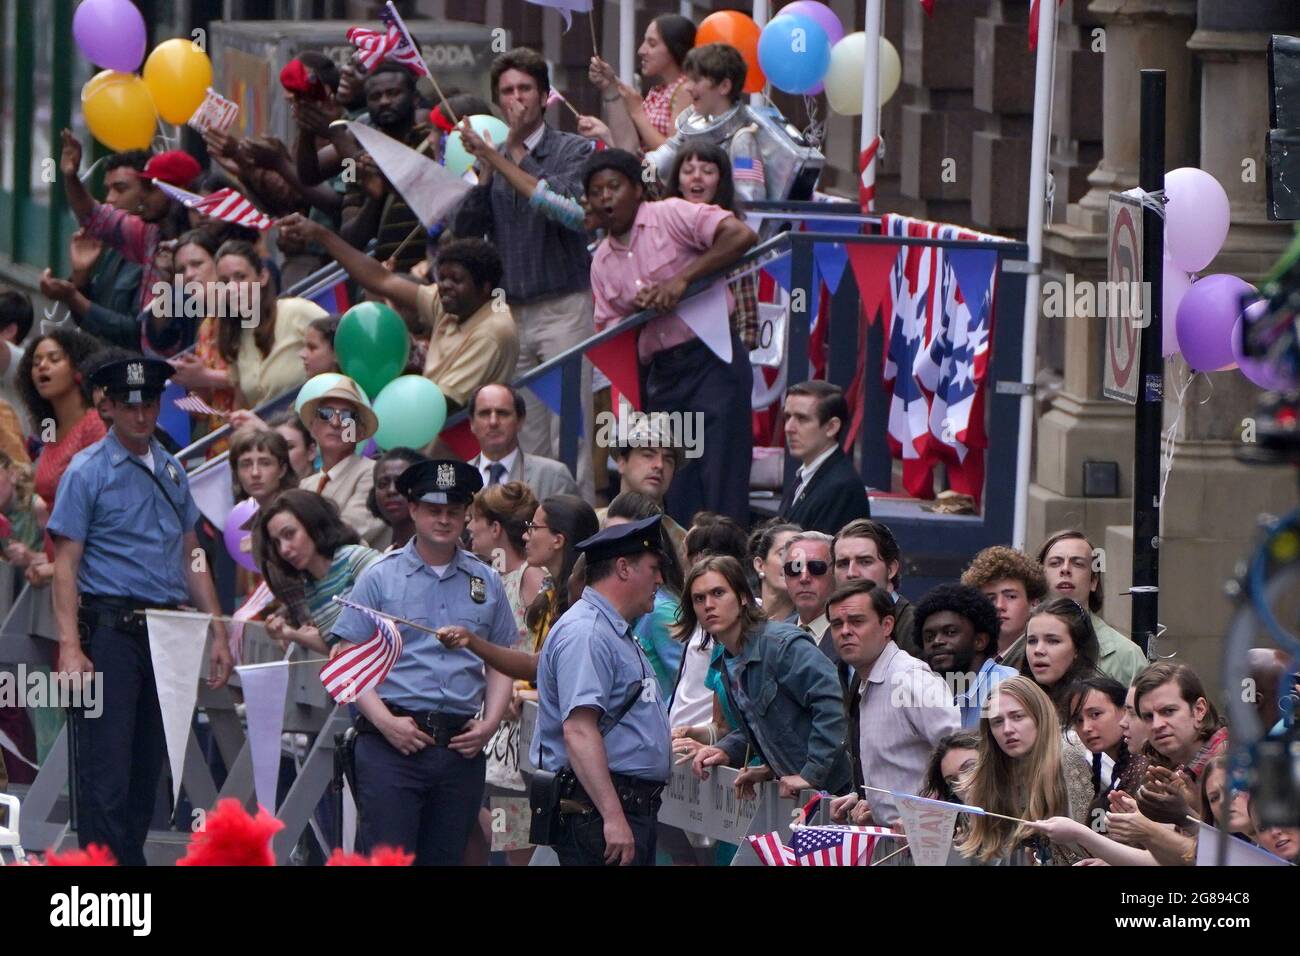 Cast during a parade scene on St Vincent Street in Glasgow city centre during filming for what is thought to be the new Indiana Jones 5 movie starring Harrison Ford. Picture date: Sunday July 18, 2021. Stock Photo